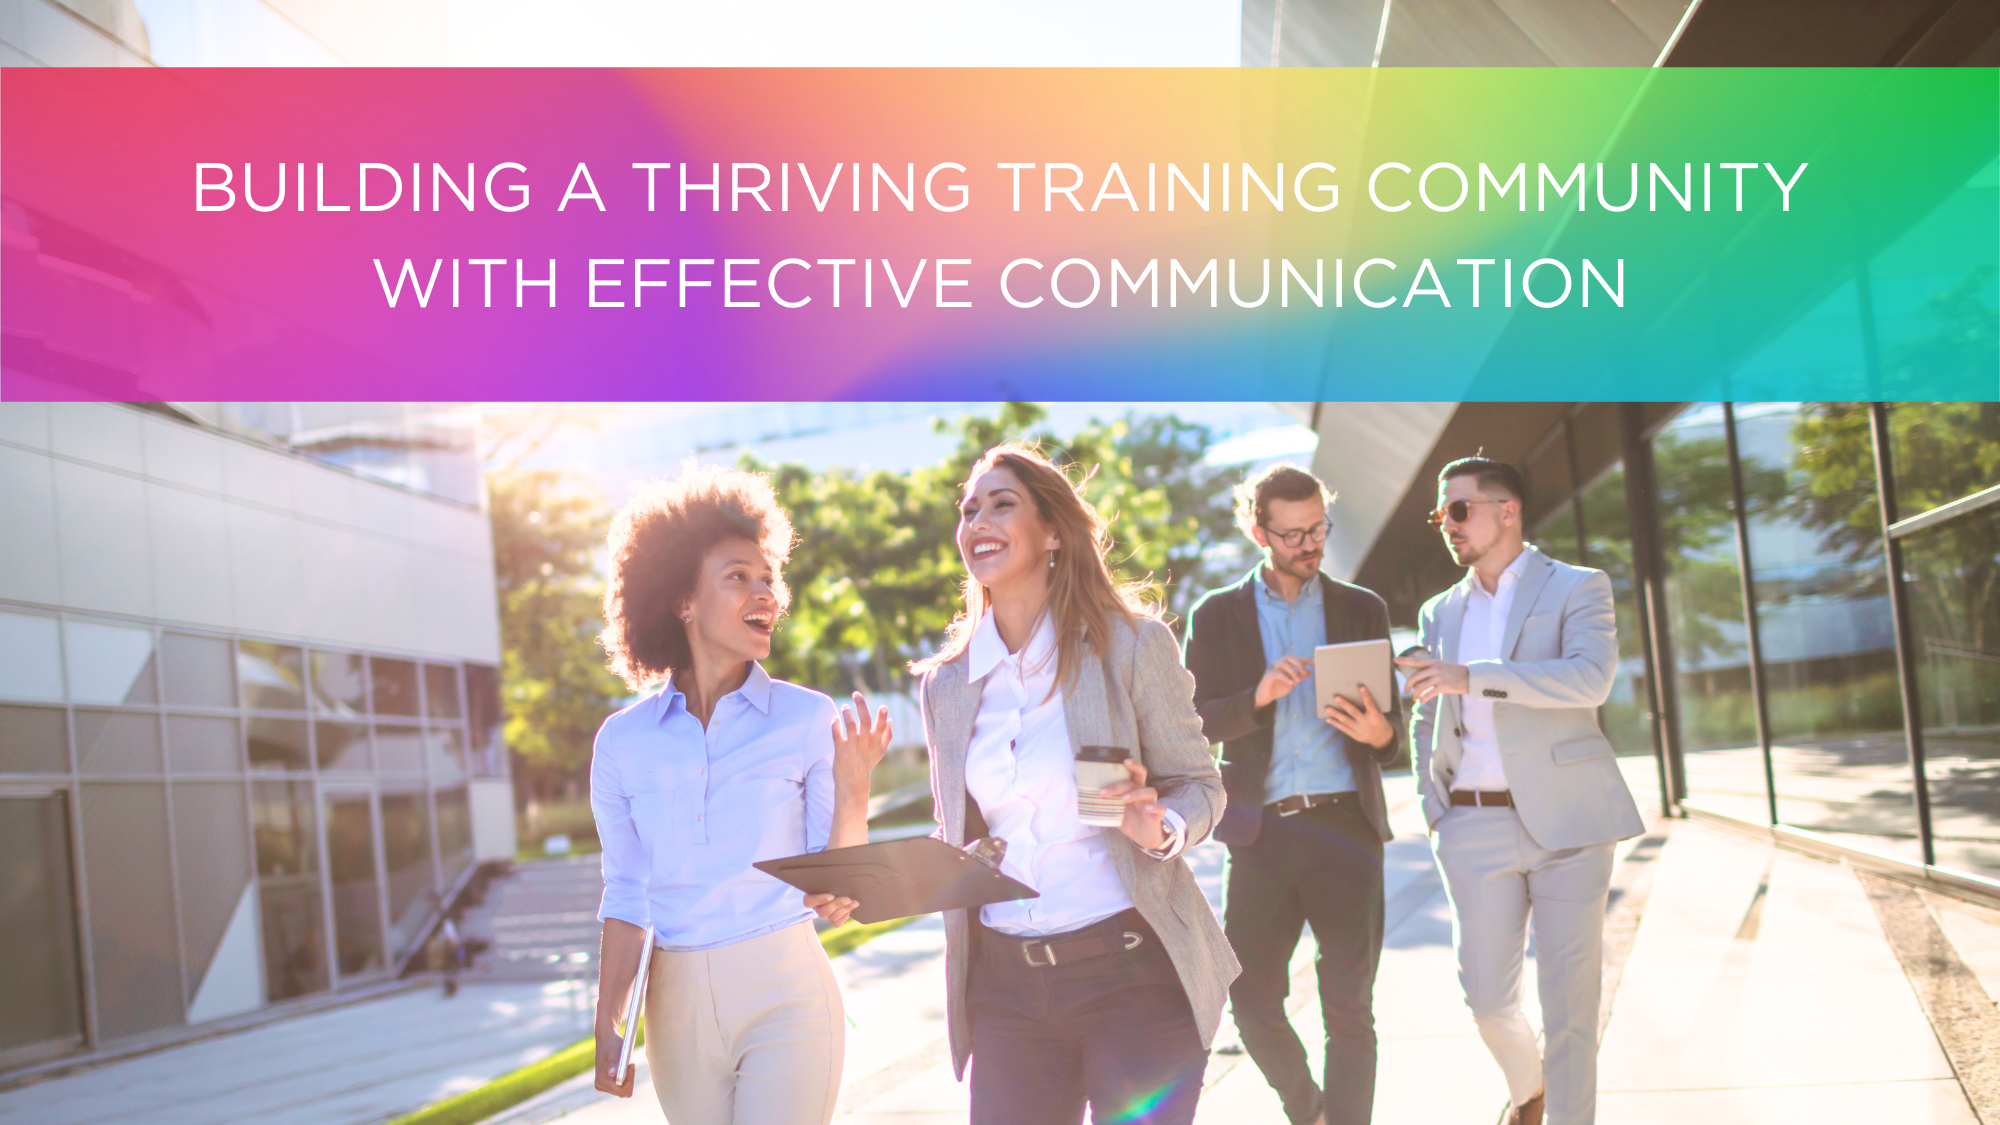 Building a Thriving Training Community with Effective Communication